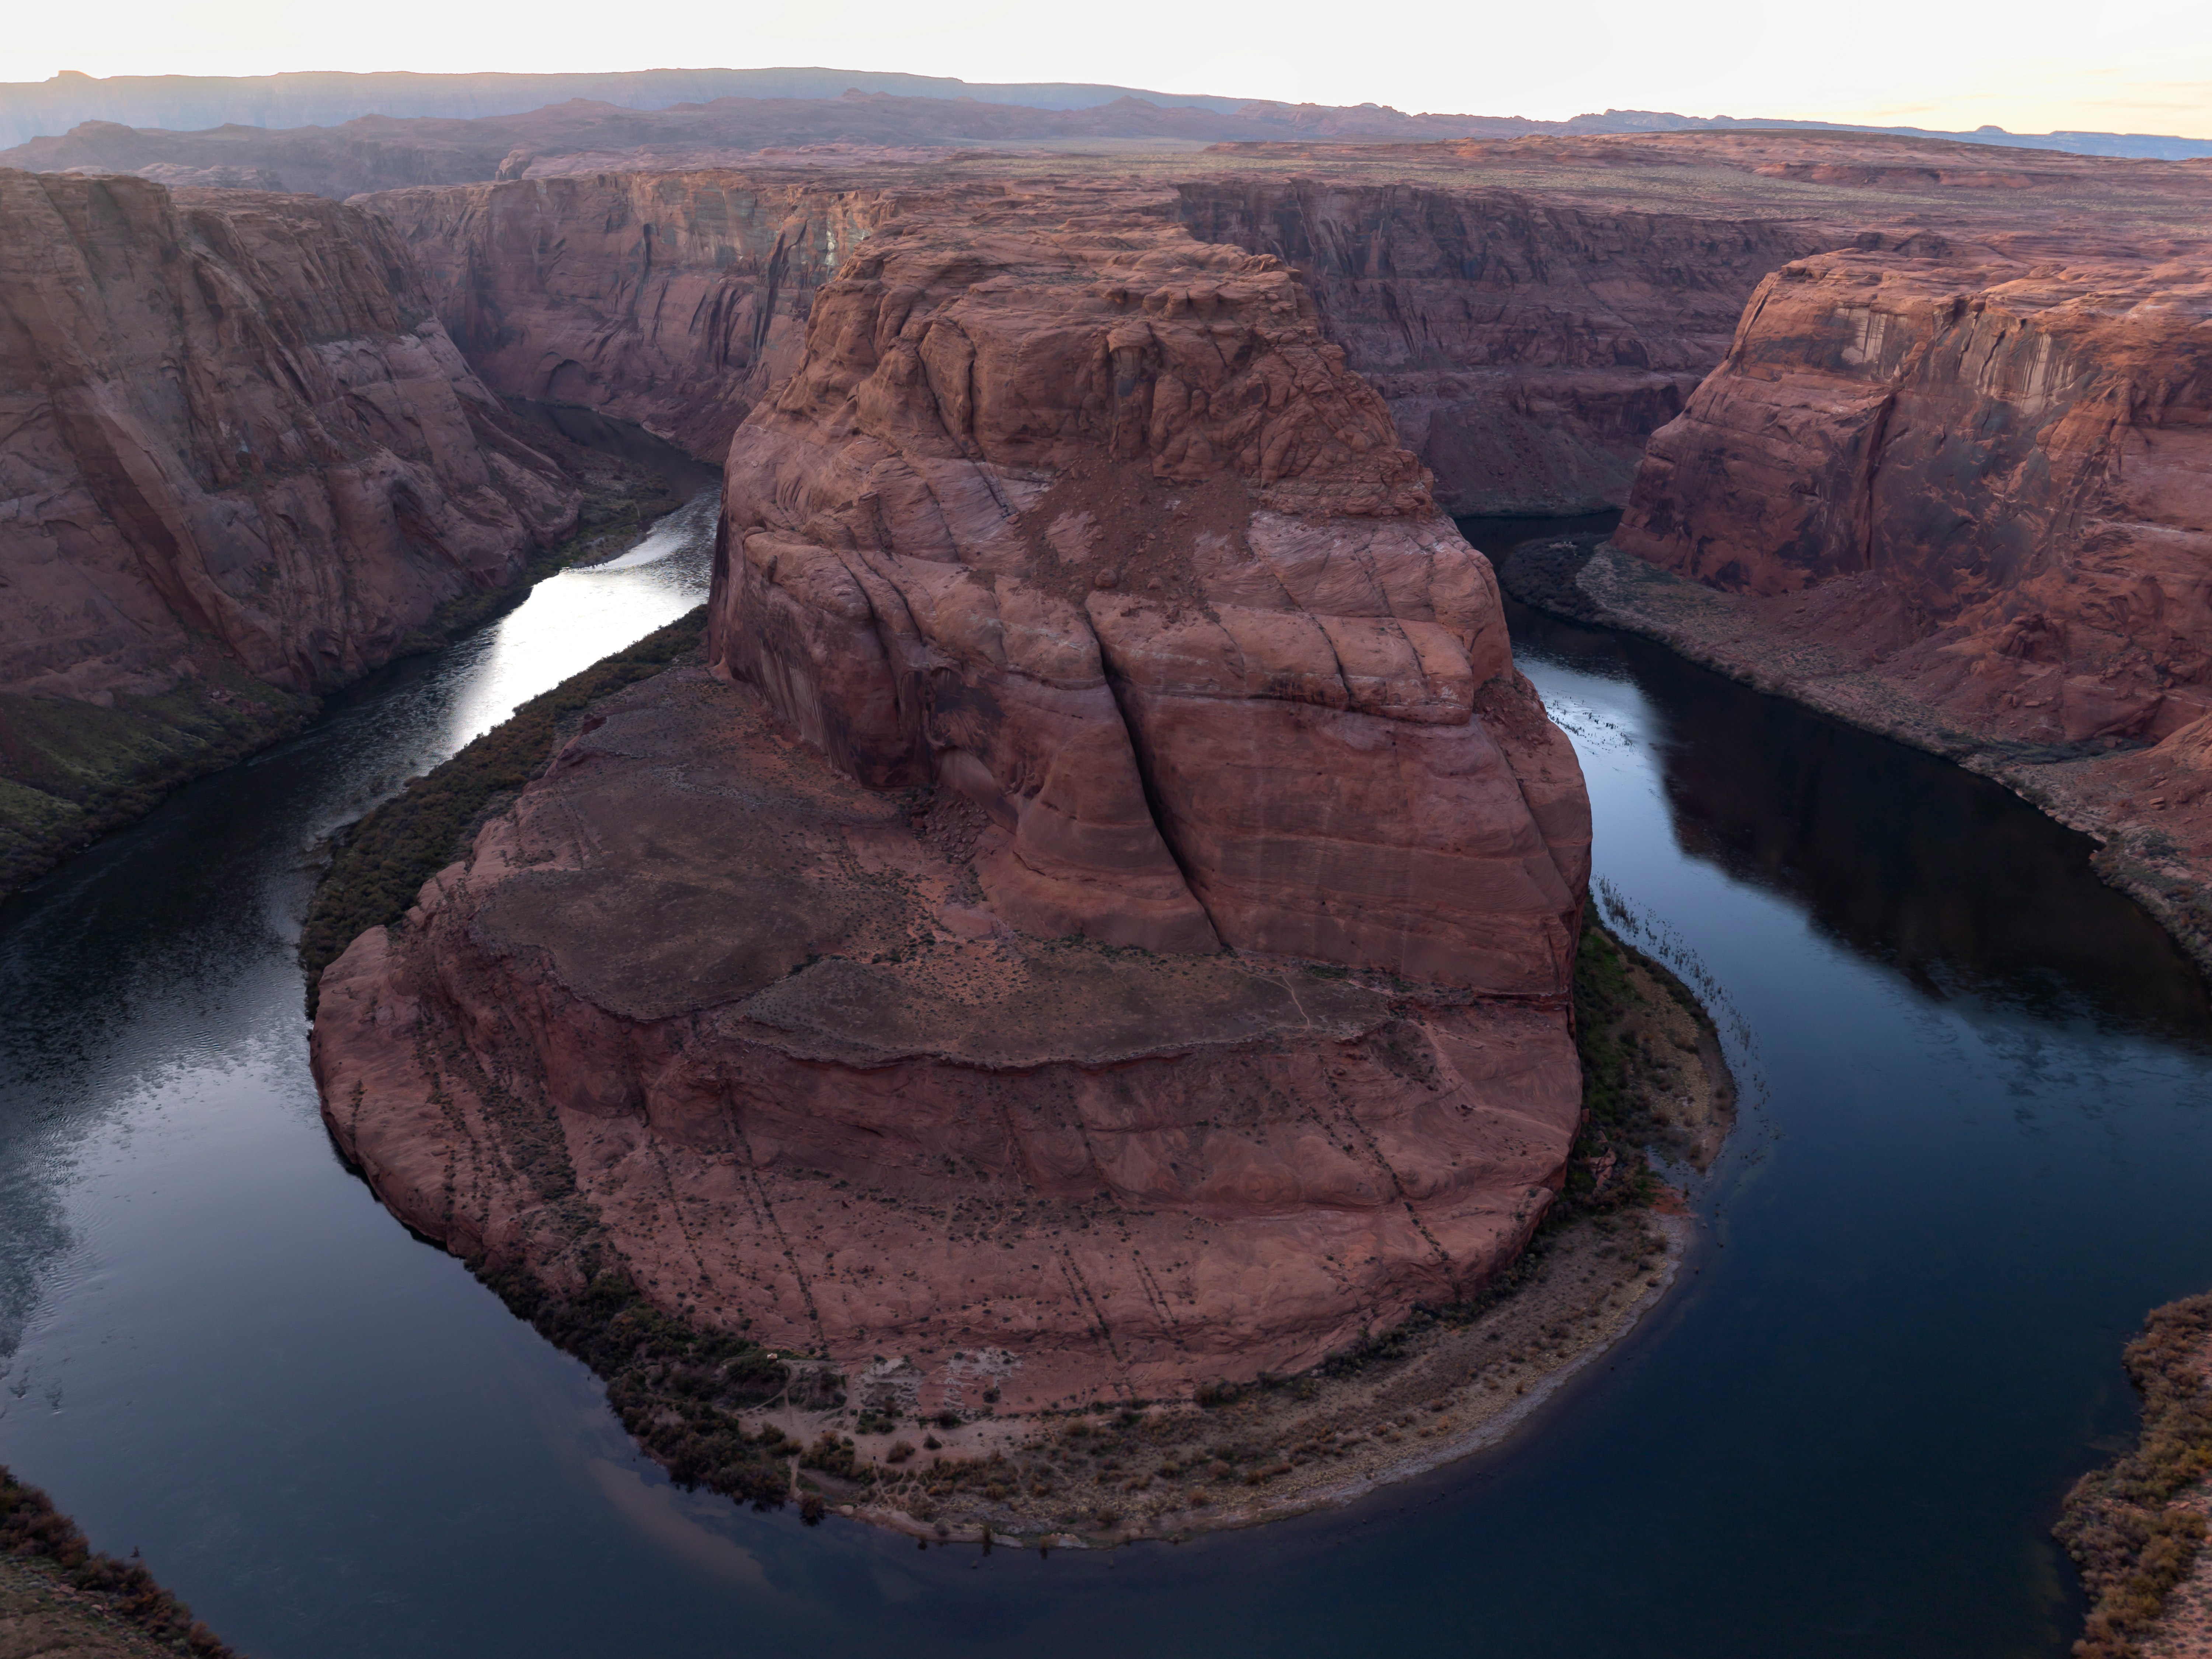 During most daylight hours, this location is packed with tourists, because everyone wants their shot of Horseshoe Bend. On this evening, I had the place to myself and was able to create a panorama of this iconic scene and eliminate the ‘wide-angle-lens-distortion’ seen in many images on the internet.